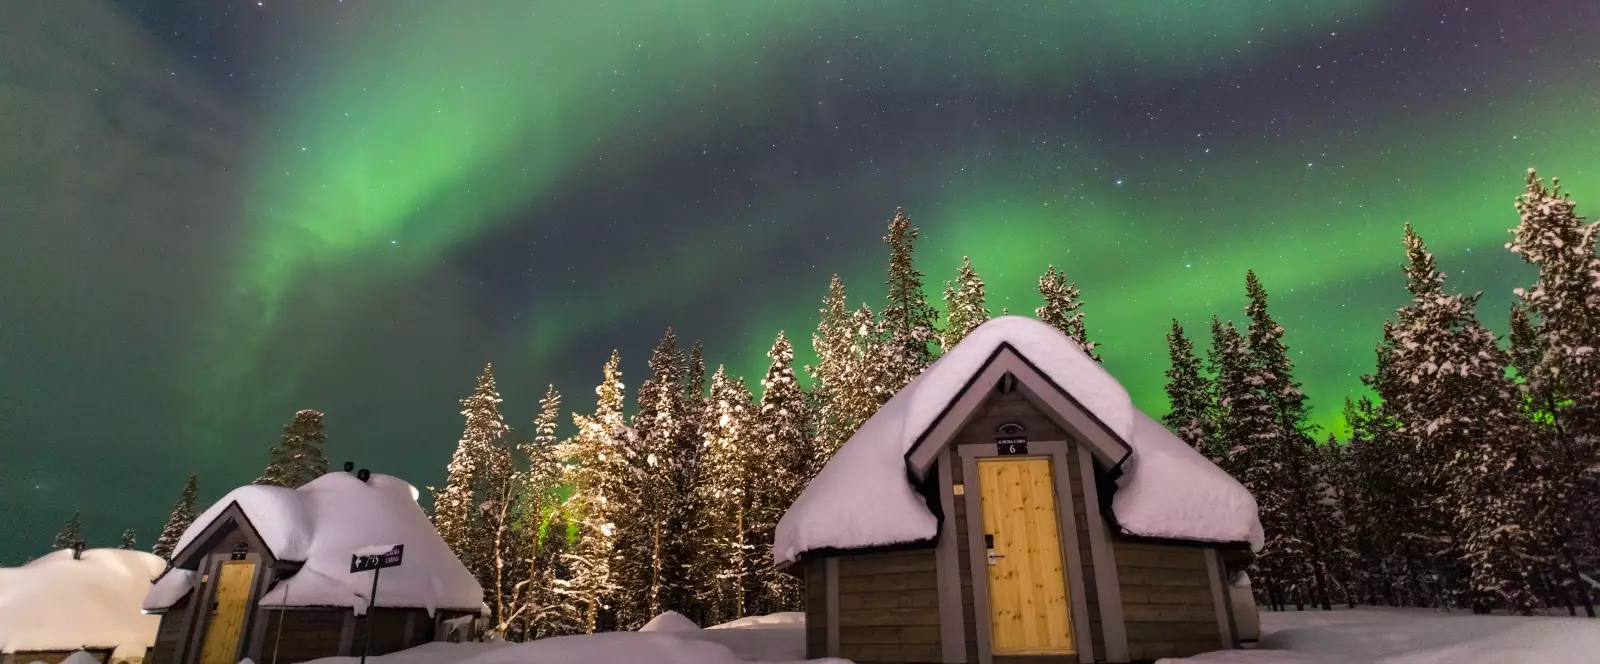 Historically, the Northern Lights have been associated with great magical power (